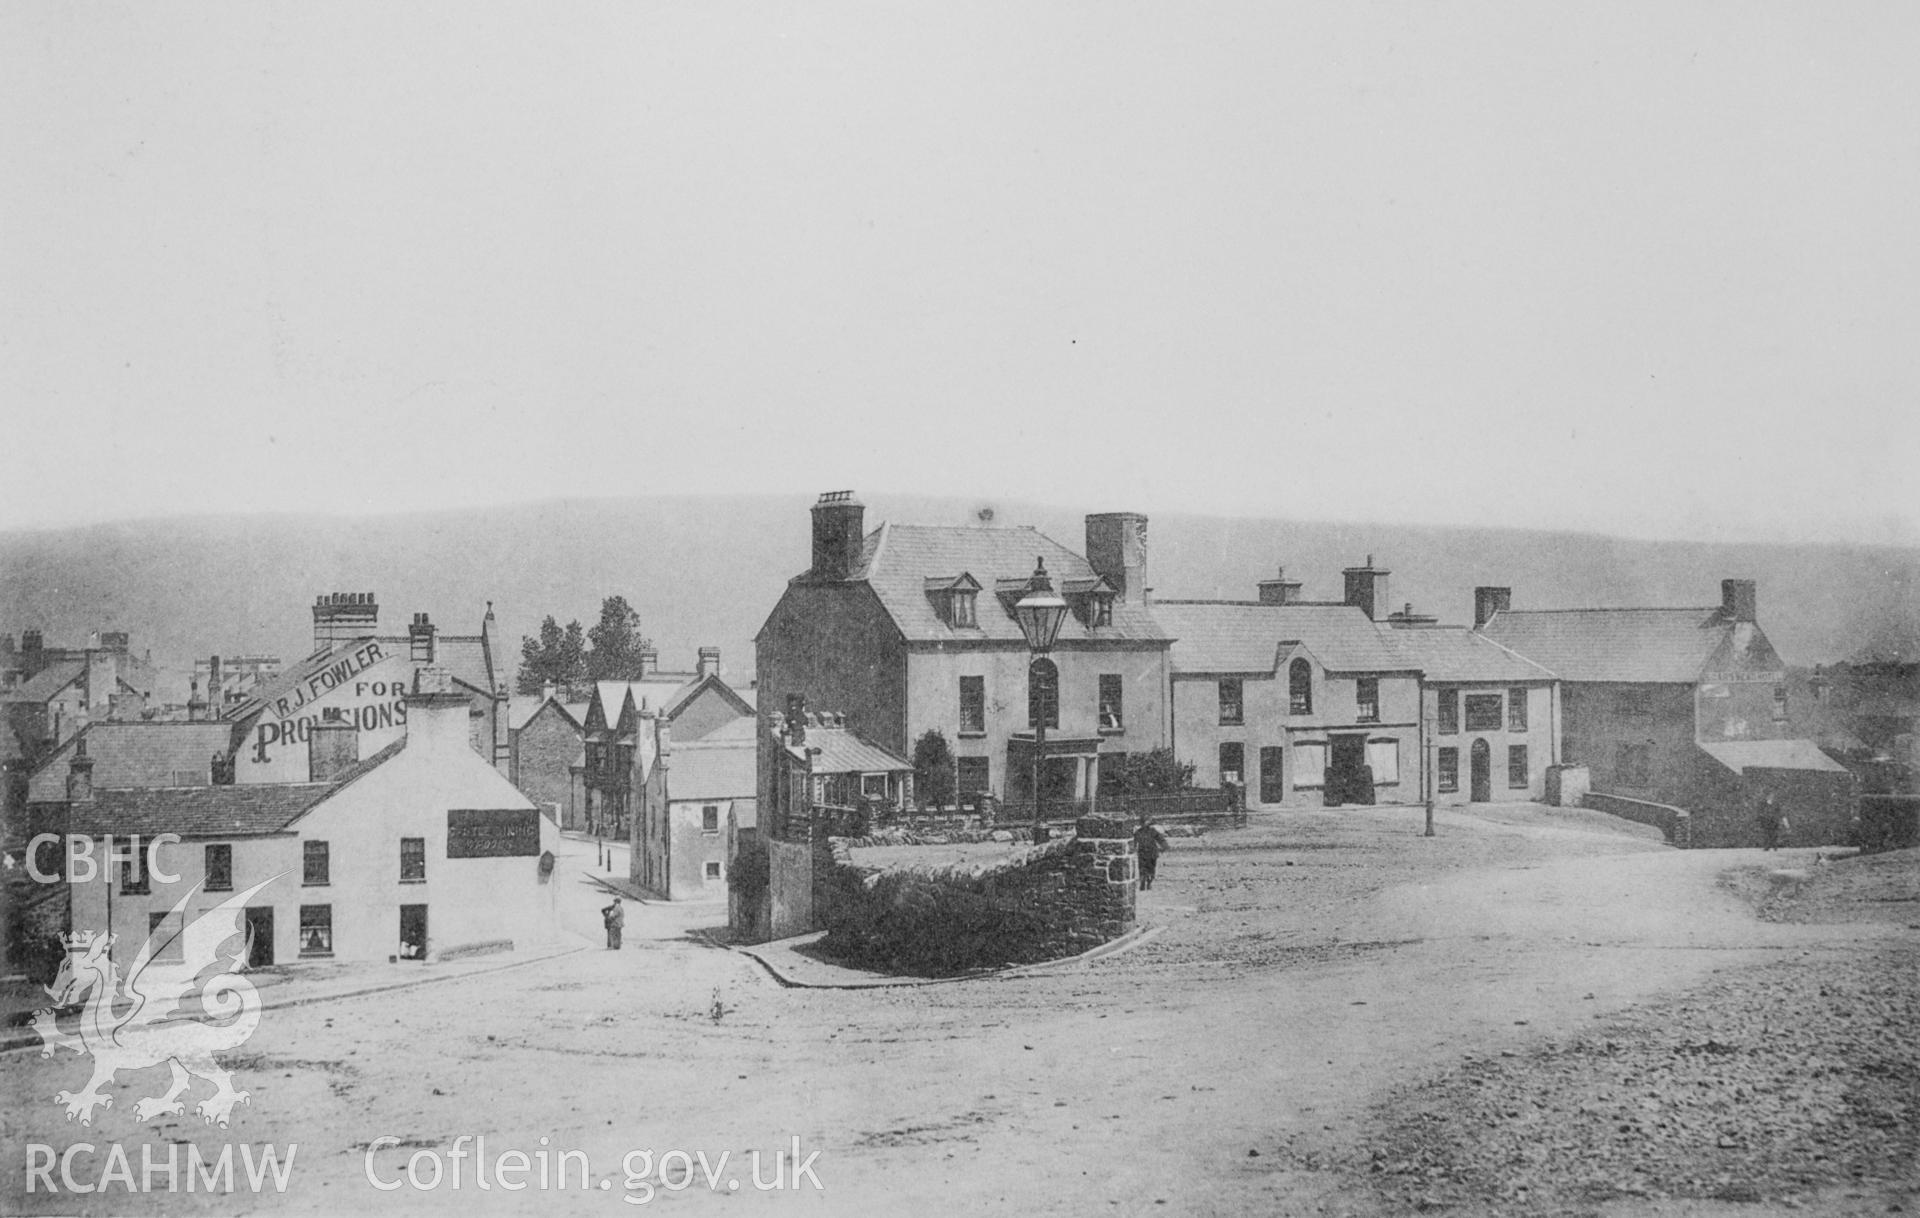 Black and white acetate negative showing the Twyn area of Caerphilly.